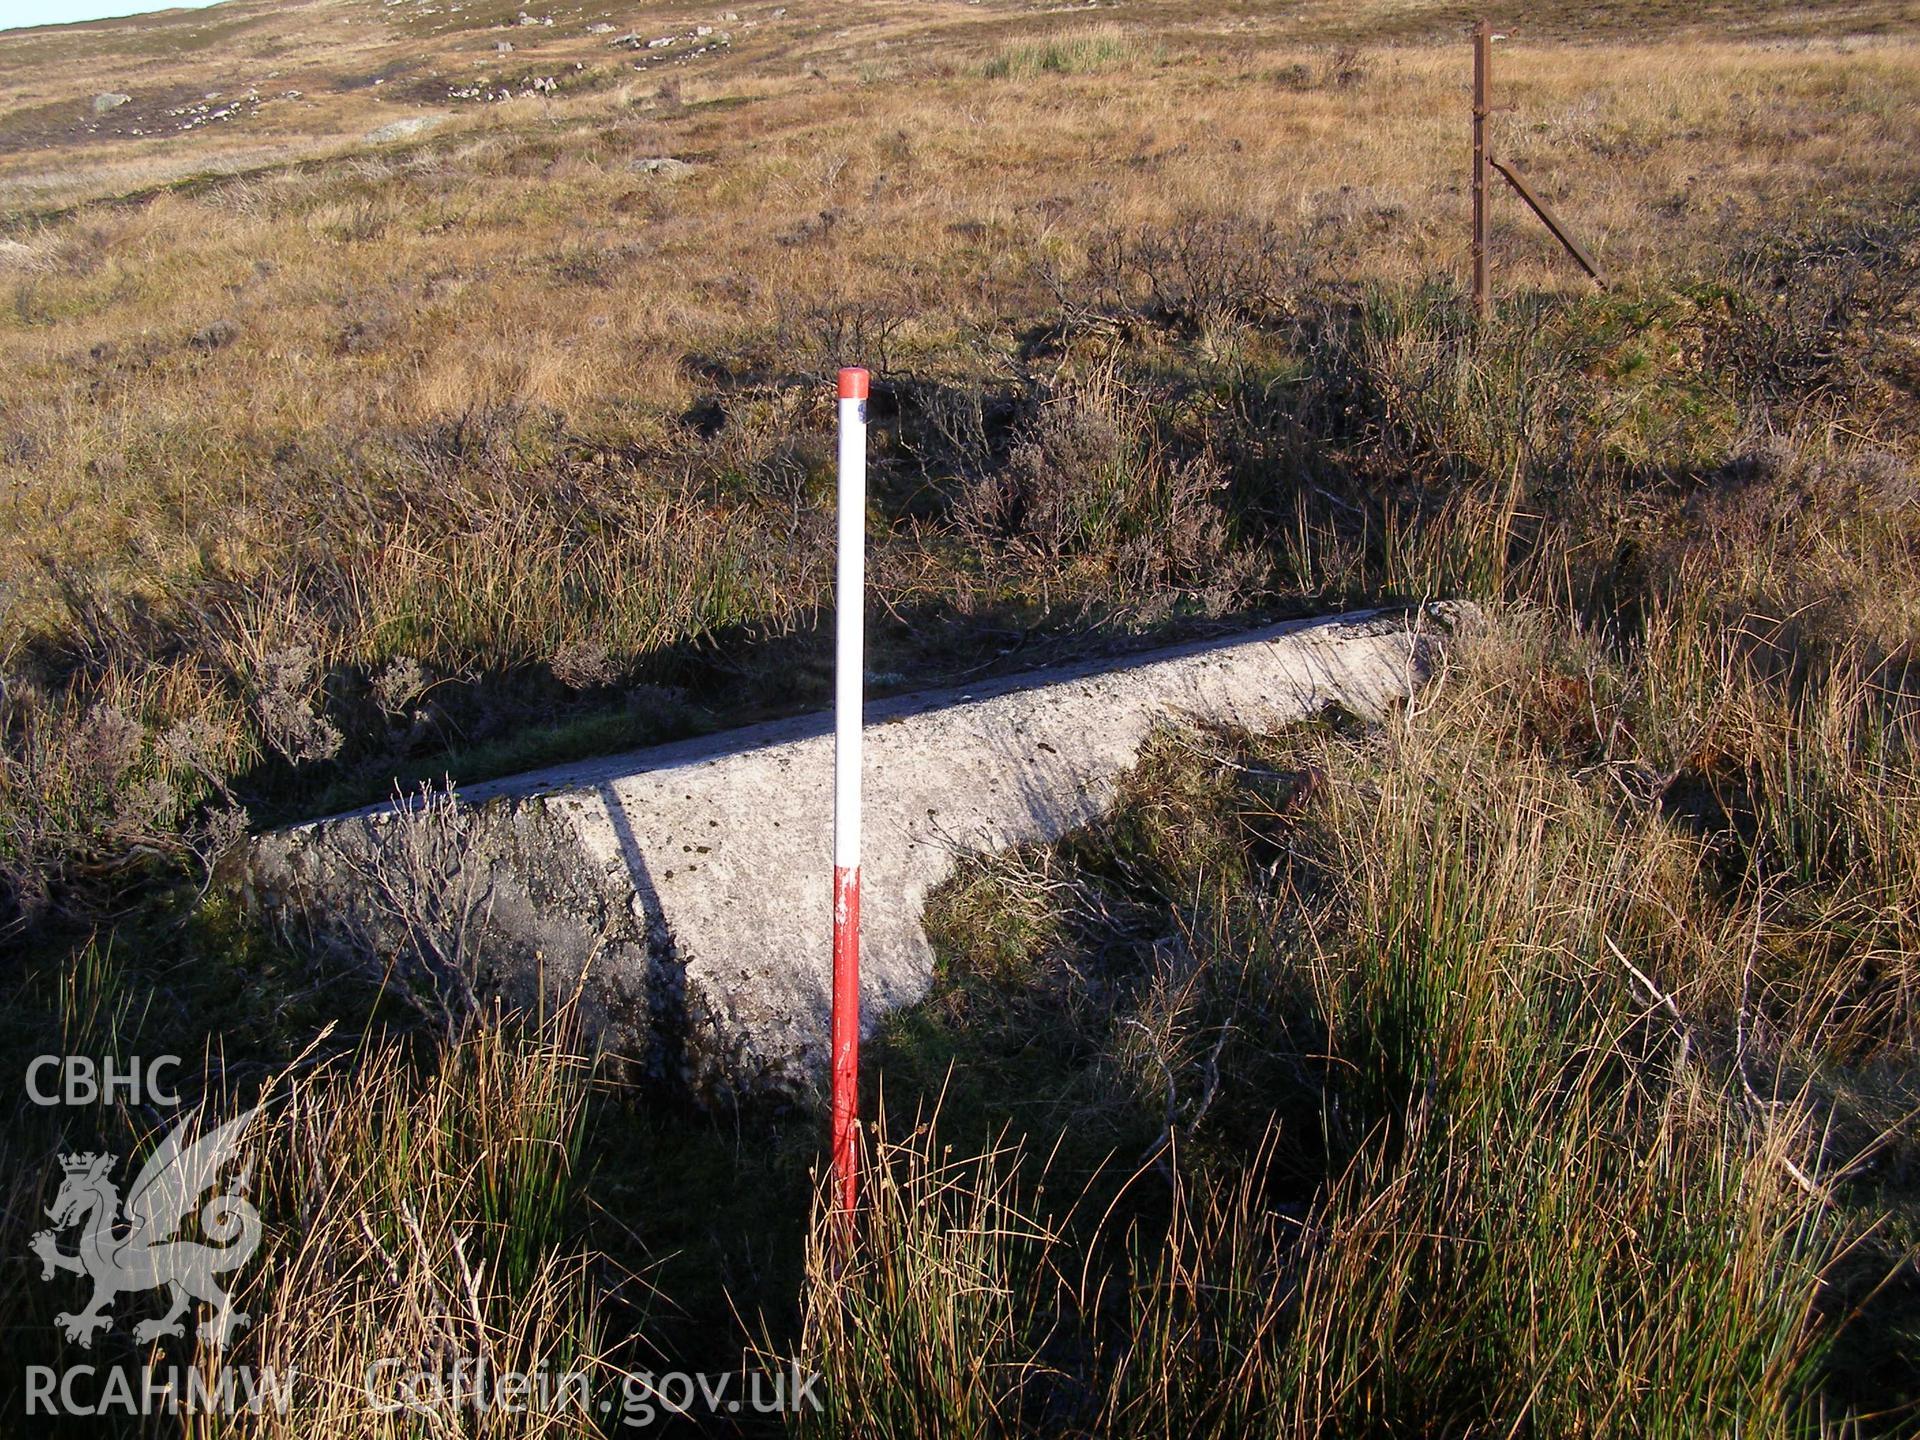 Digital colour photograph of Cefn Du Radio Station, concrete base XL taken on 10/12/2007 by P.J. Schofield during the Snowdon North West Upland Survey undertaken by Oxford Archaeology North.